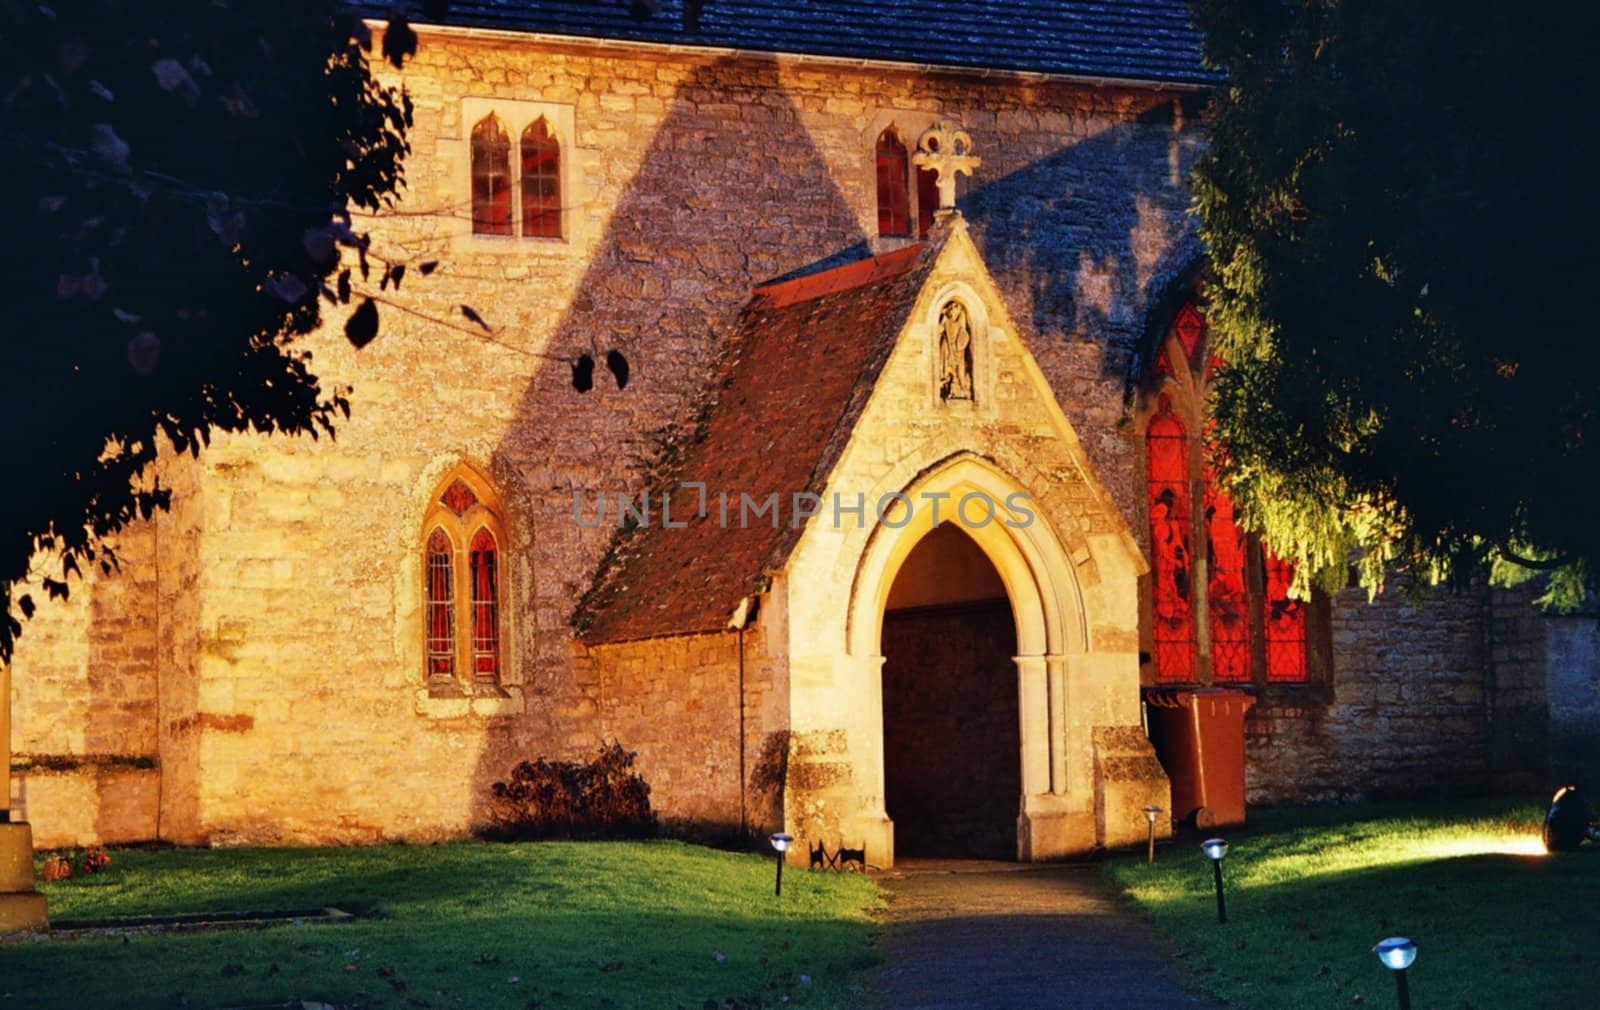 entry of old english country church by night